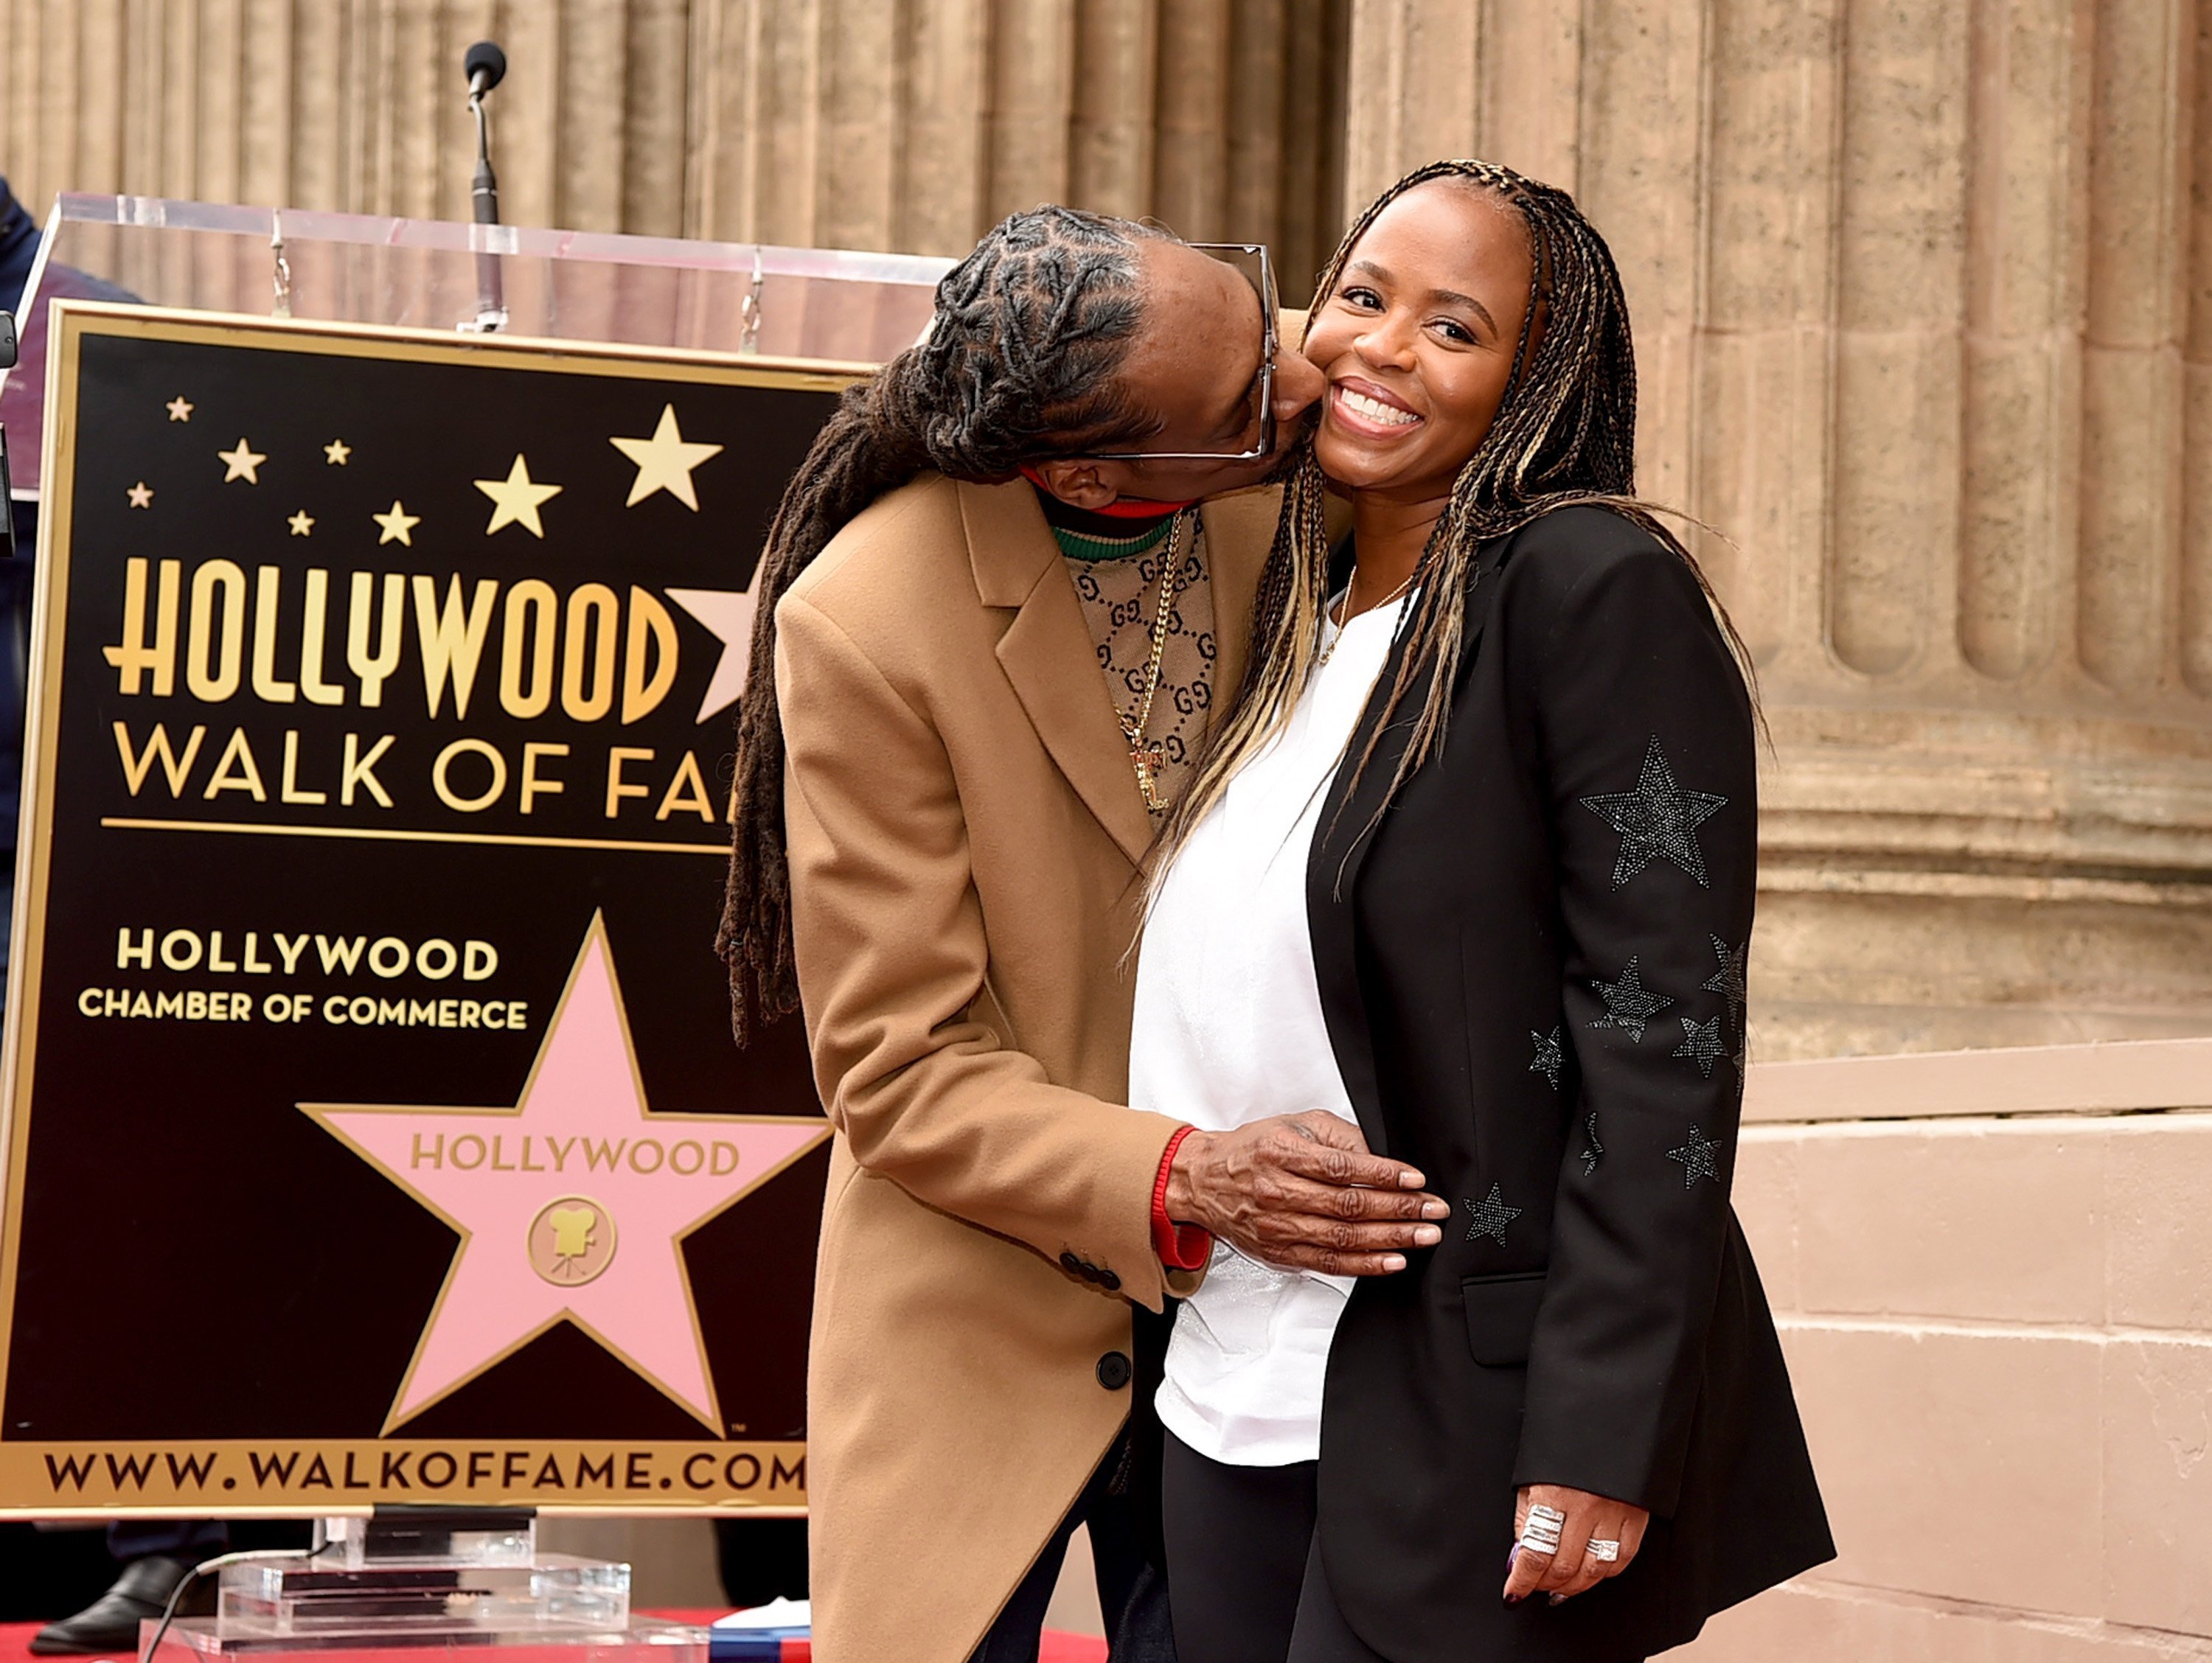 Snoop Dogg with his wife Shante Broadus on The Hollywood Walk Of Fame on November 19, 2018. | Source: Getty Images